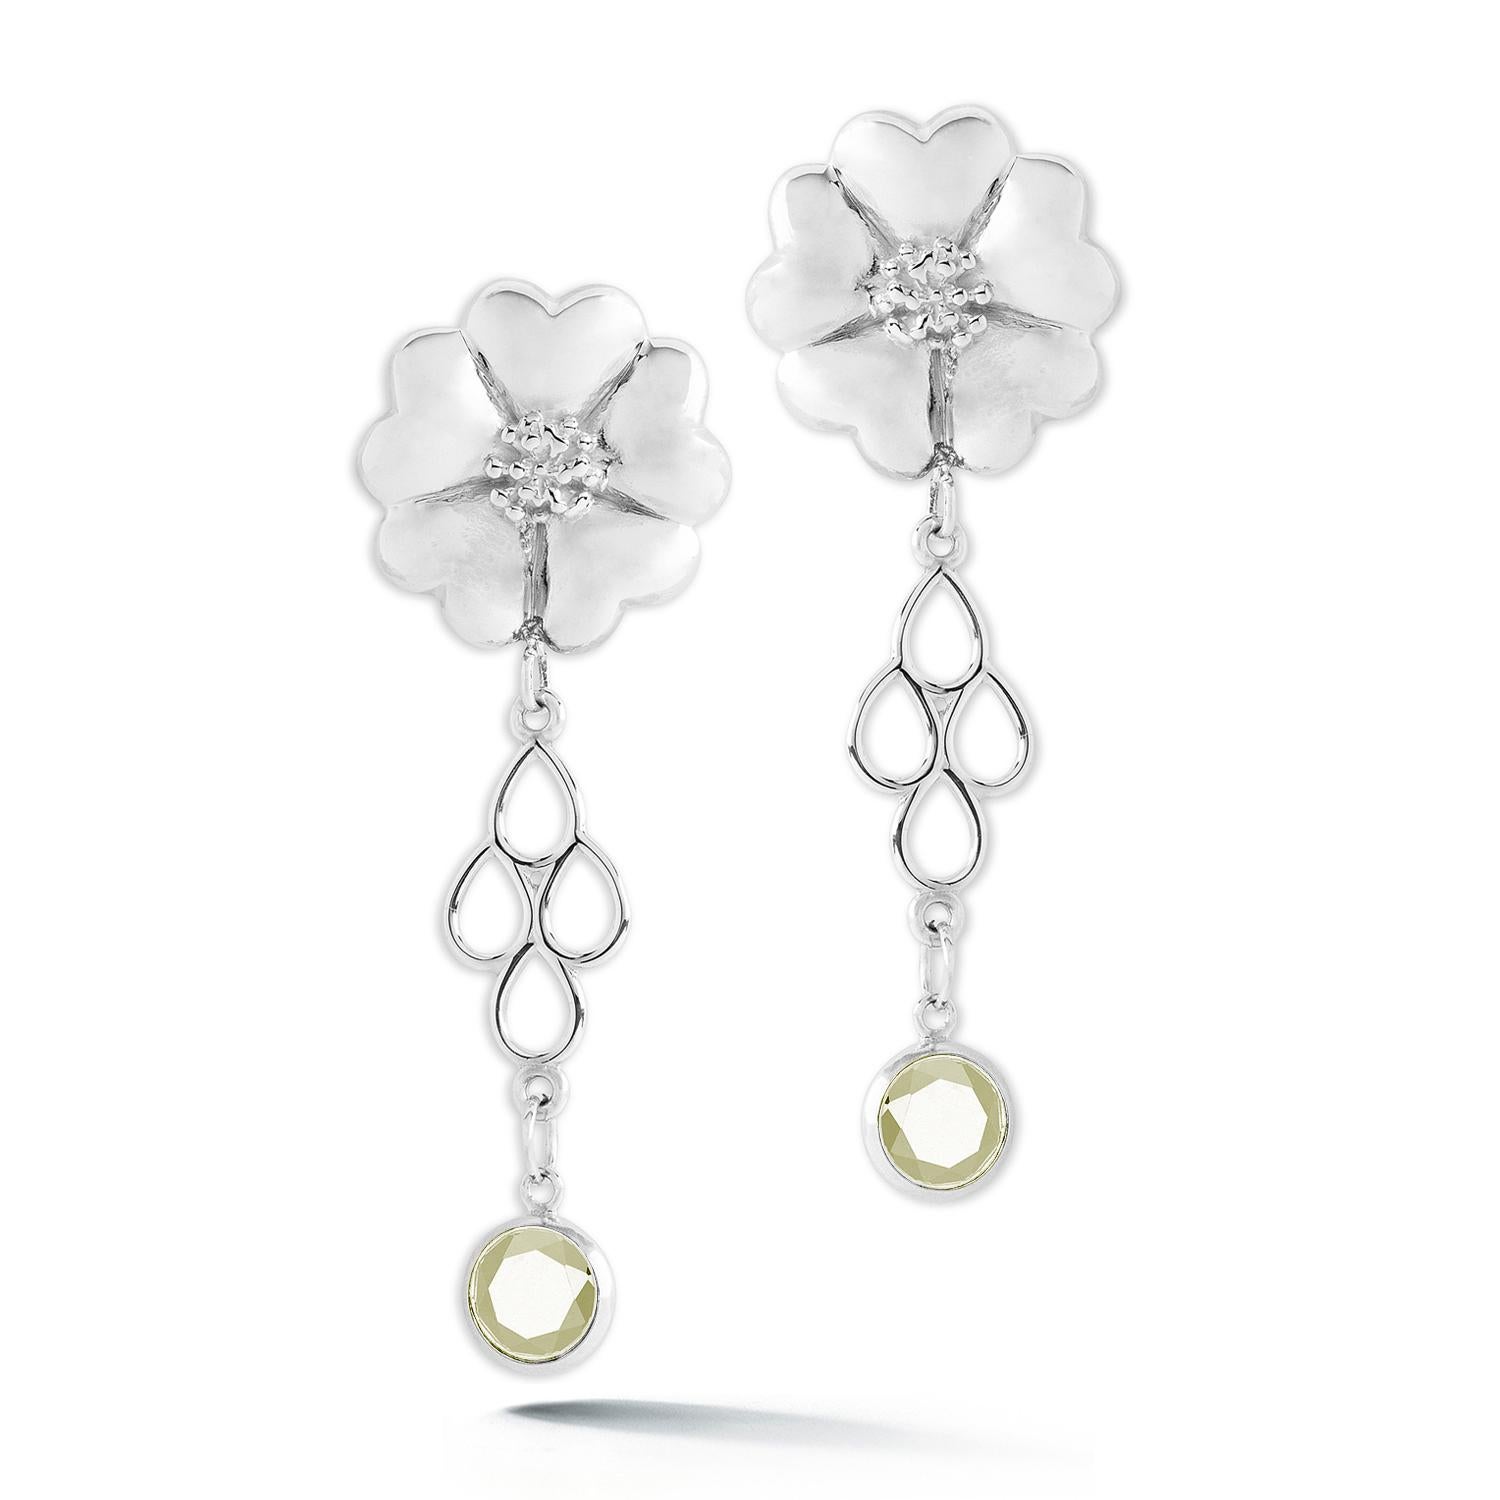 Designed in NYC

.925 Sterling Silver 2 x 6 mm Light Blue Topaz Blossom Stone Chandelier Earrings. No matter the season, allow natural beauty to surround you wherever you go. Blossom stone chandelier earrings: 

	Sterling silver 
	High-polish finish